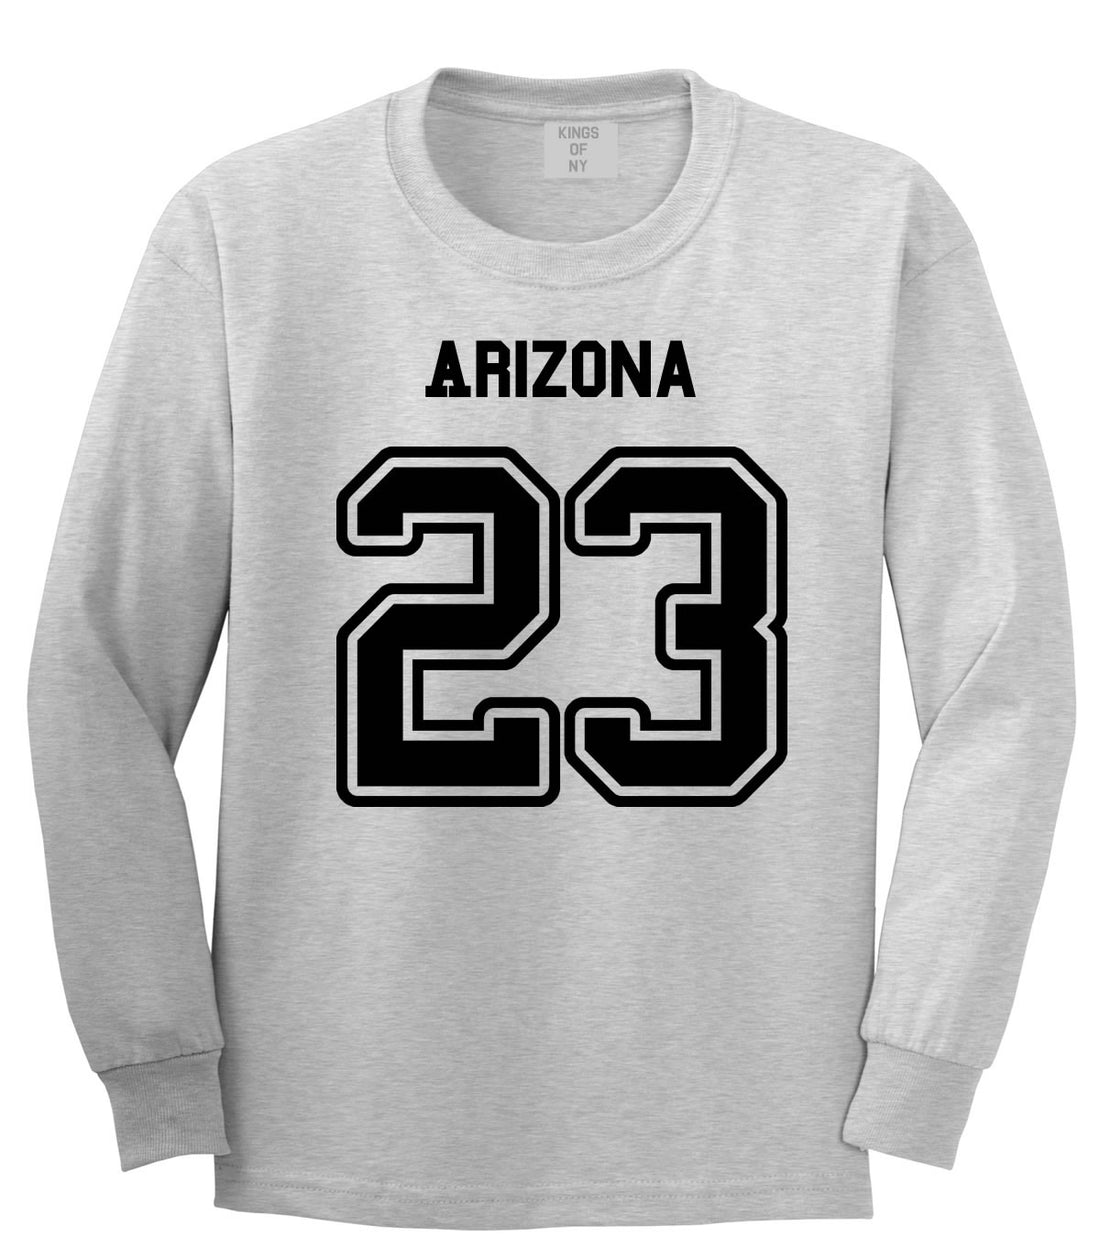 Sport Style Arizona 23 Team State Jersey Long Sleeve T-Shirt By Kings Of NY